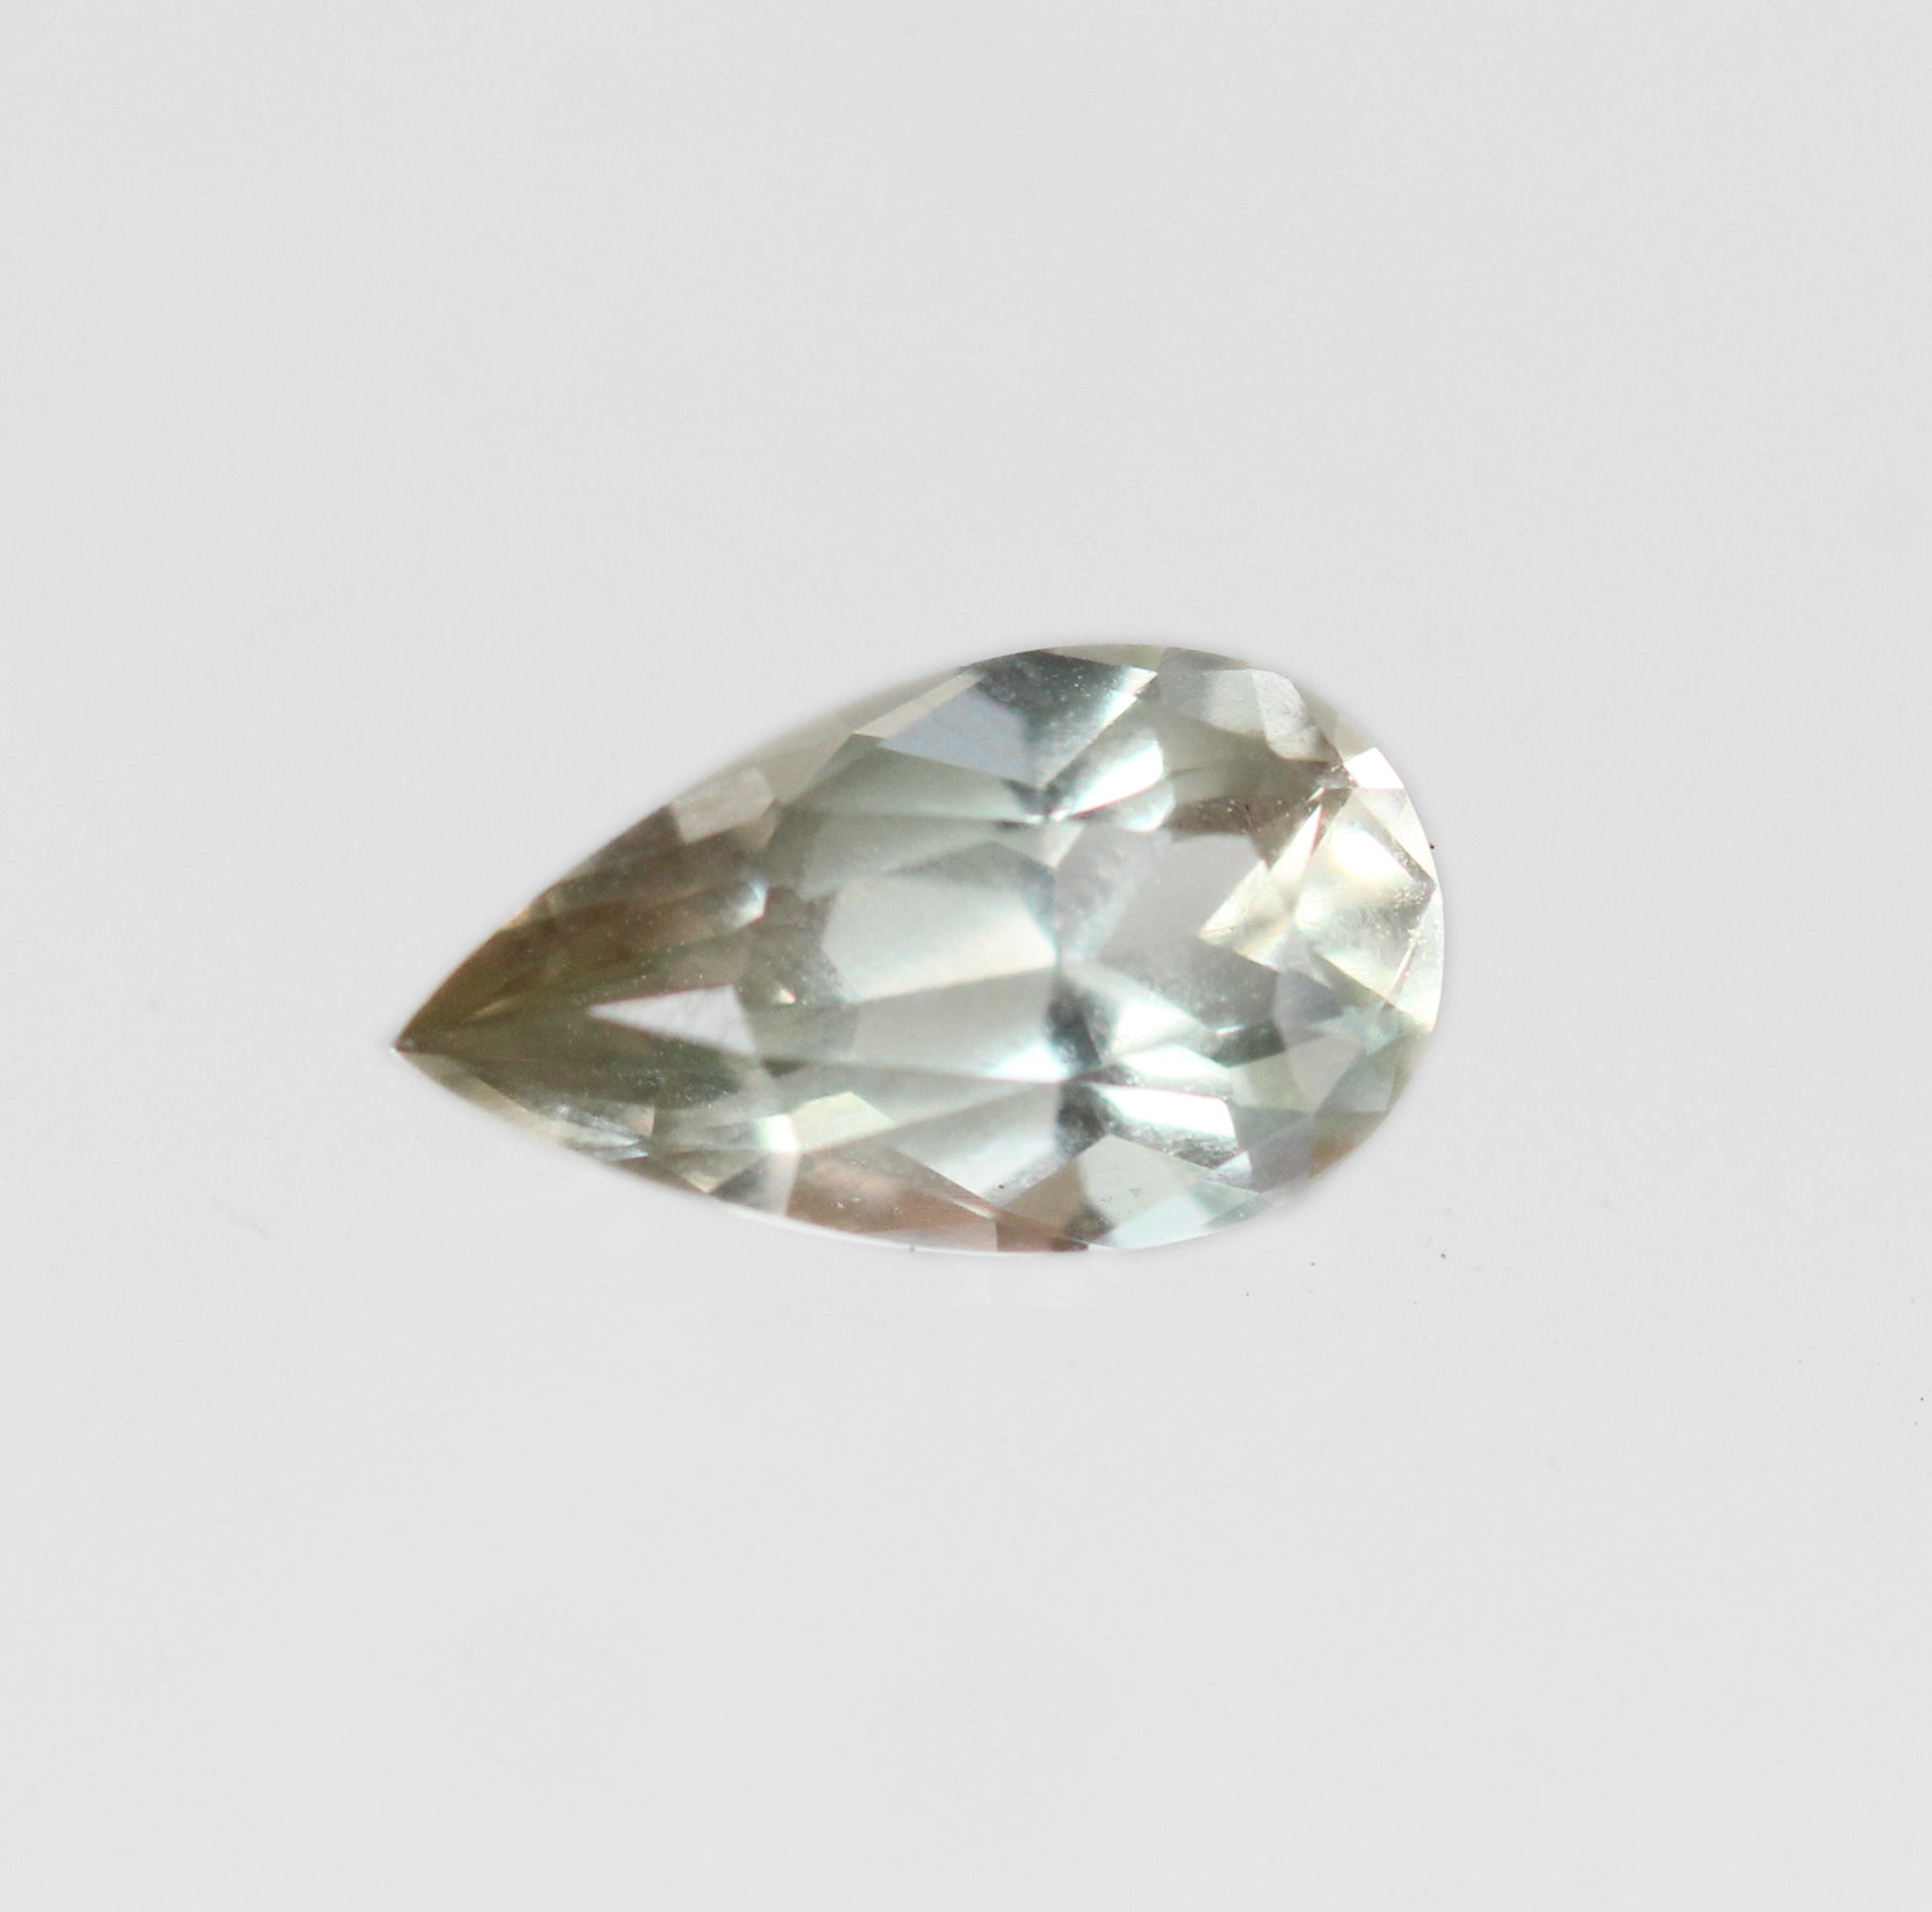 1.27ct Oregon Sunstone for Custom Work - Inventory Code SUN127 - Midwinter Co. Alternative Bridal Rings and Modern Fine Jewelry